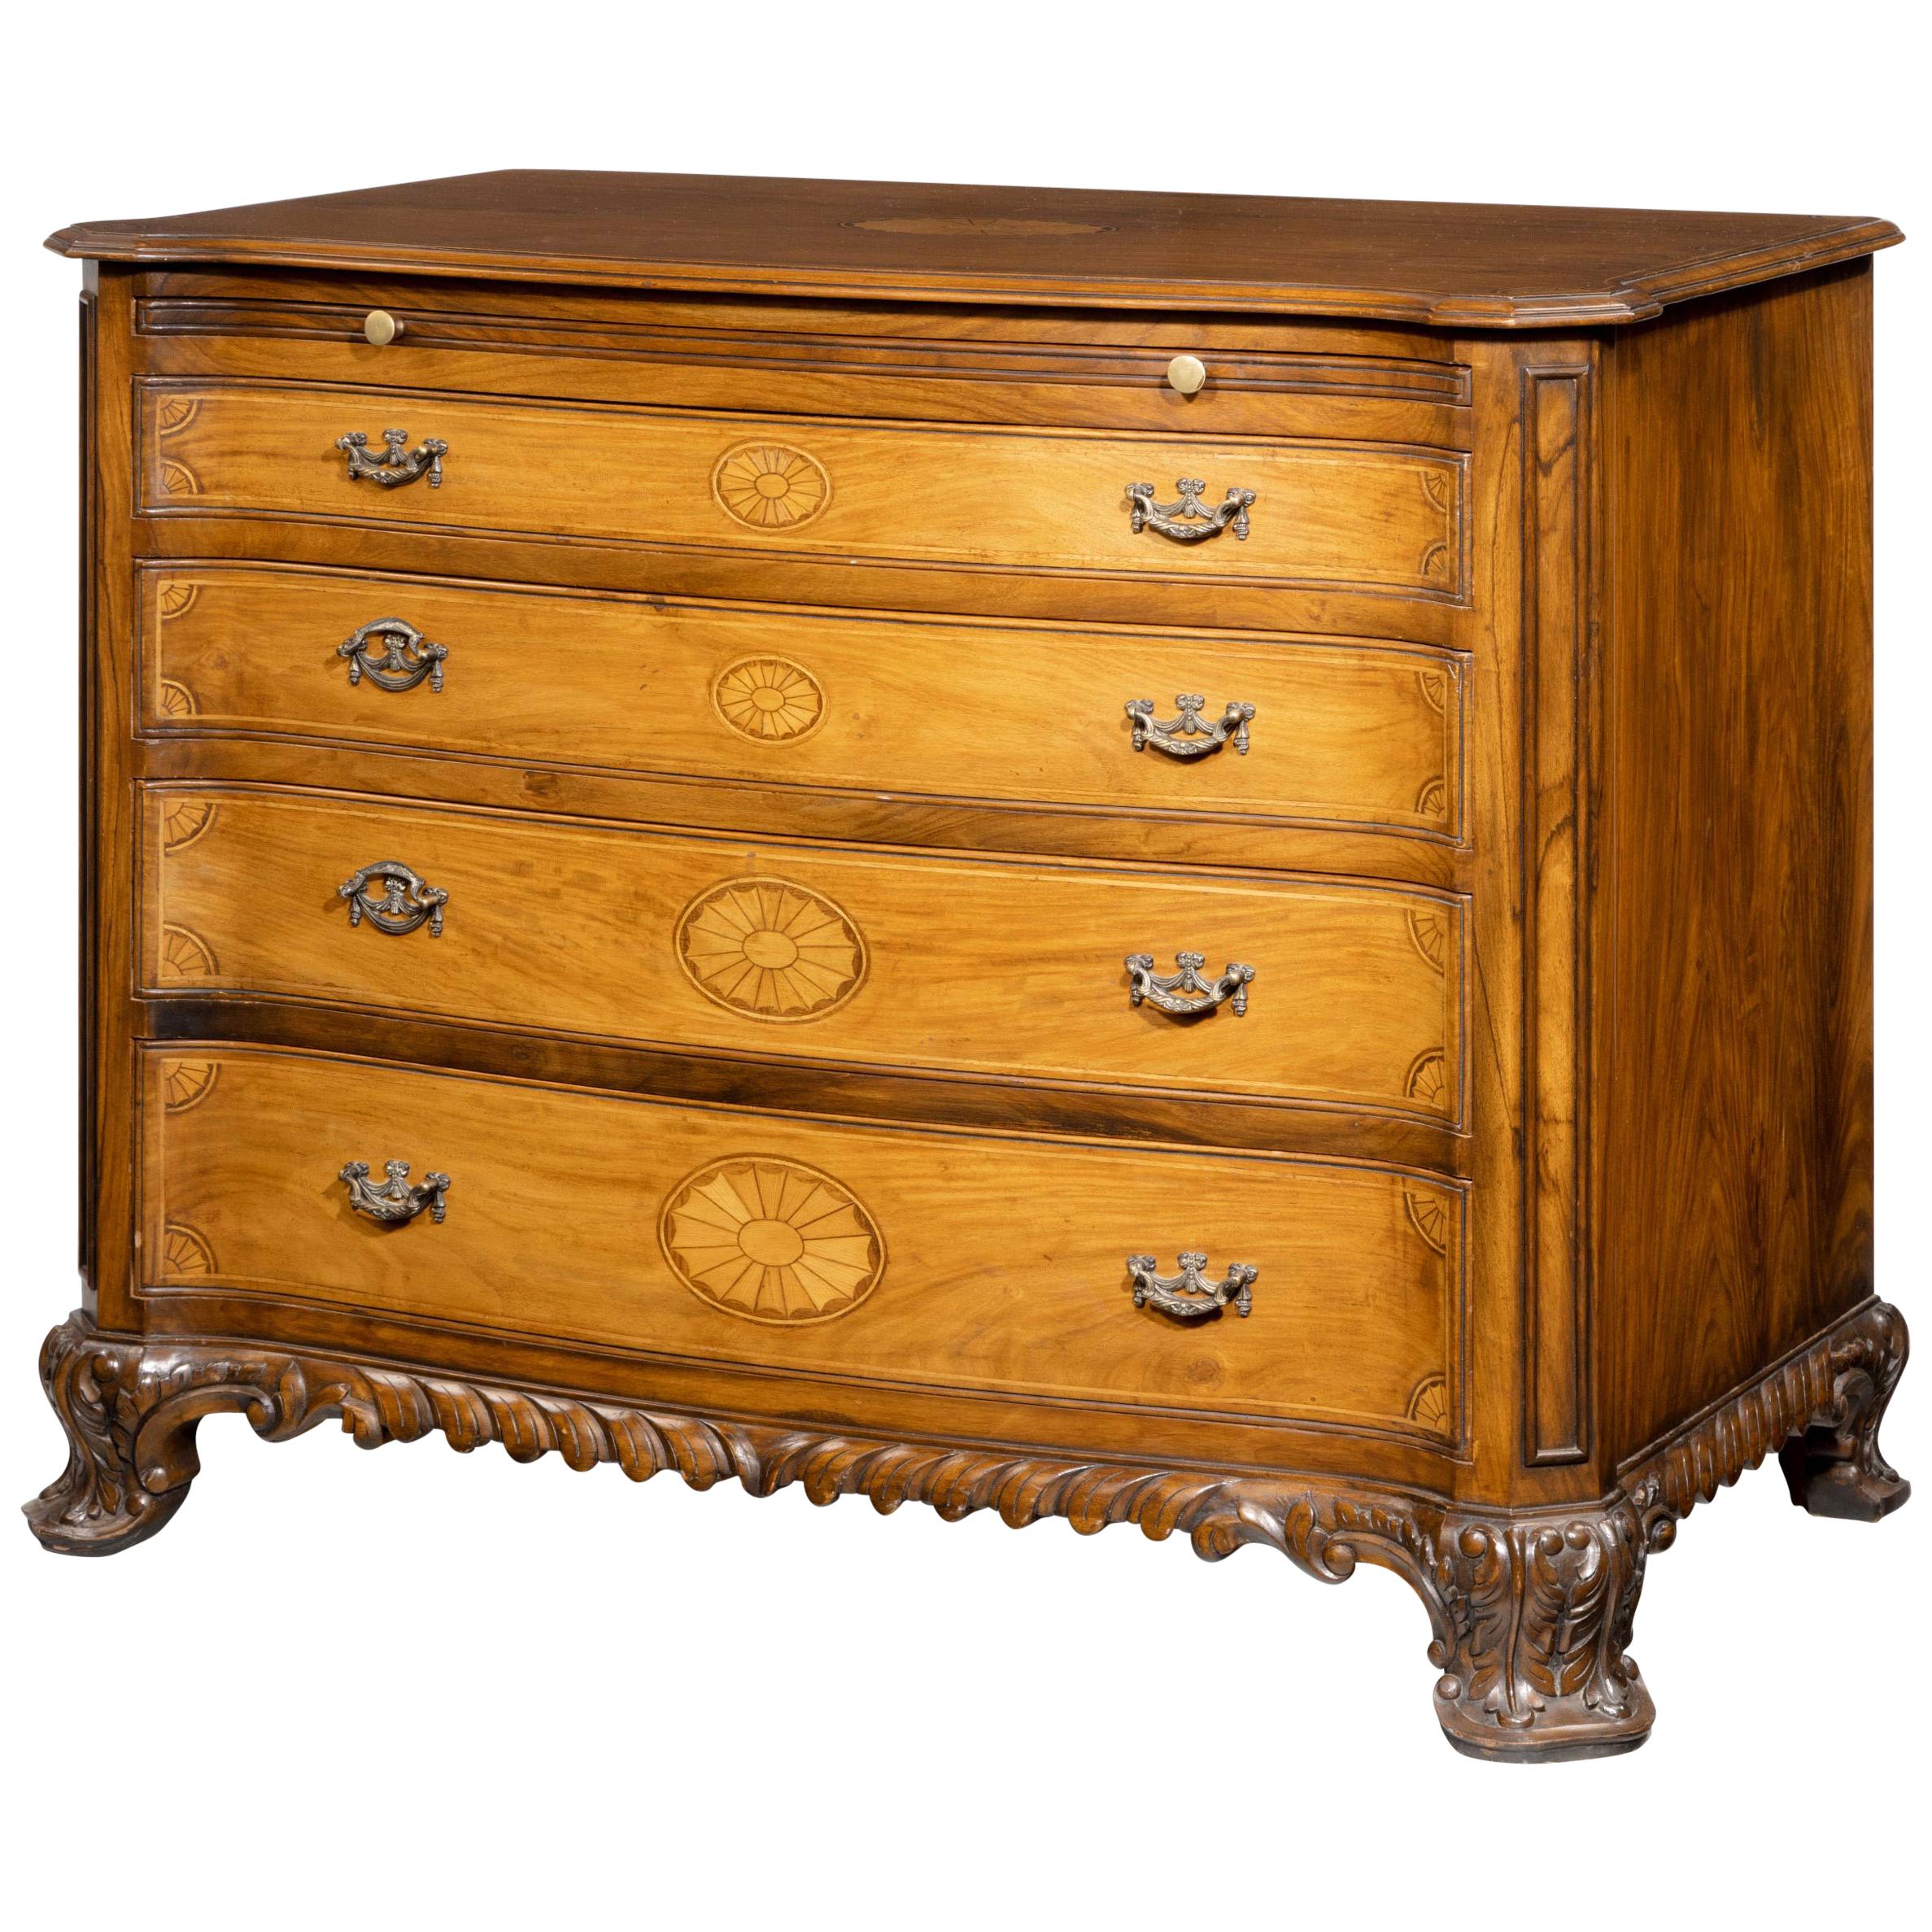 Quite Exceptional Early 20th Century Serpentine Fronted Mahogany Commode